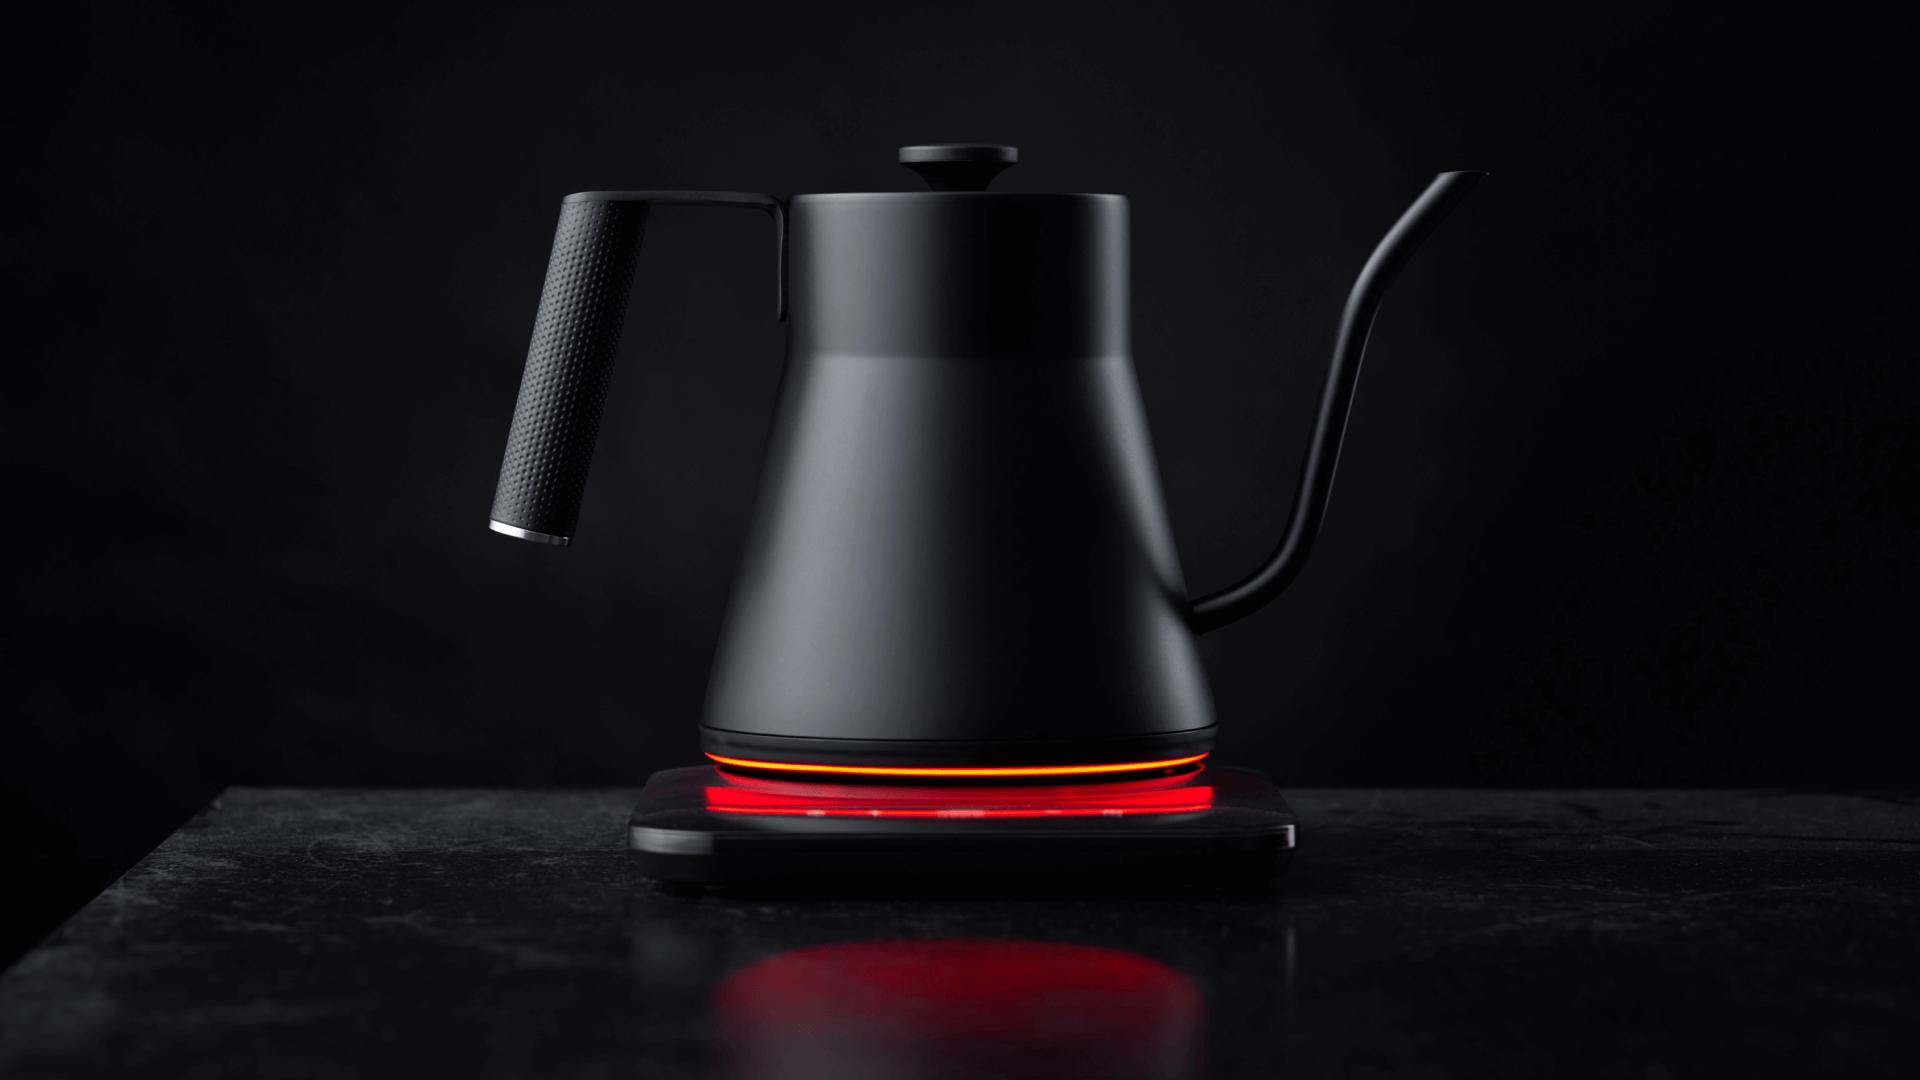 Making pour-over never looked so good, light the barista in you.